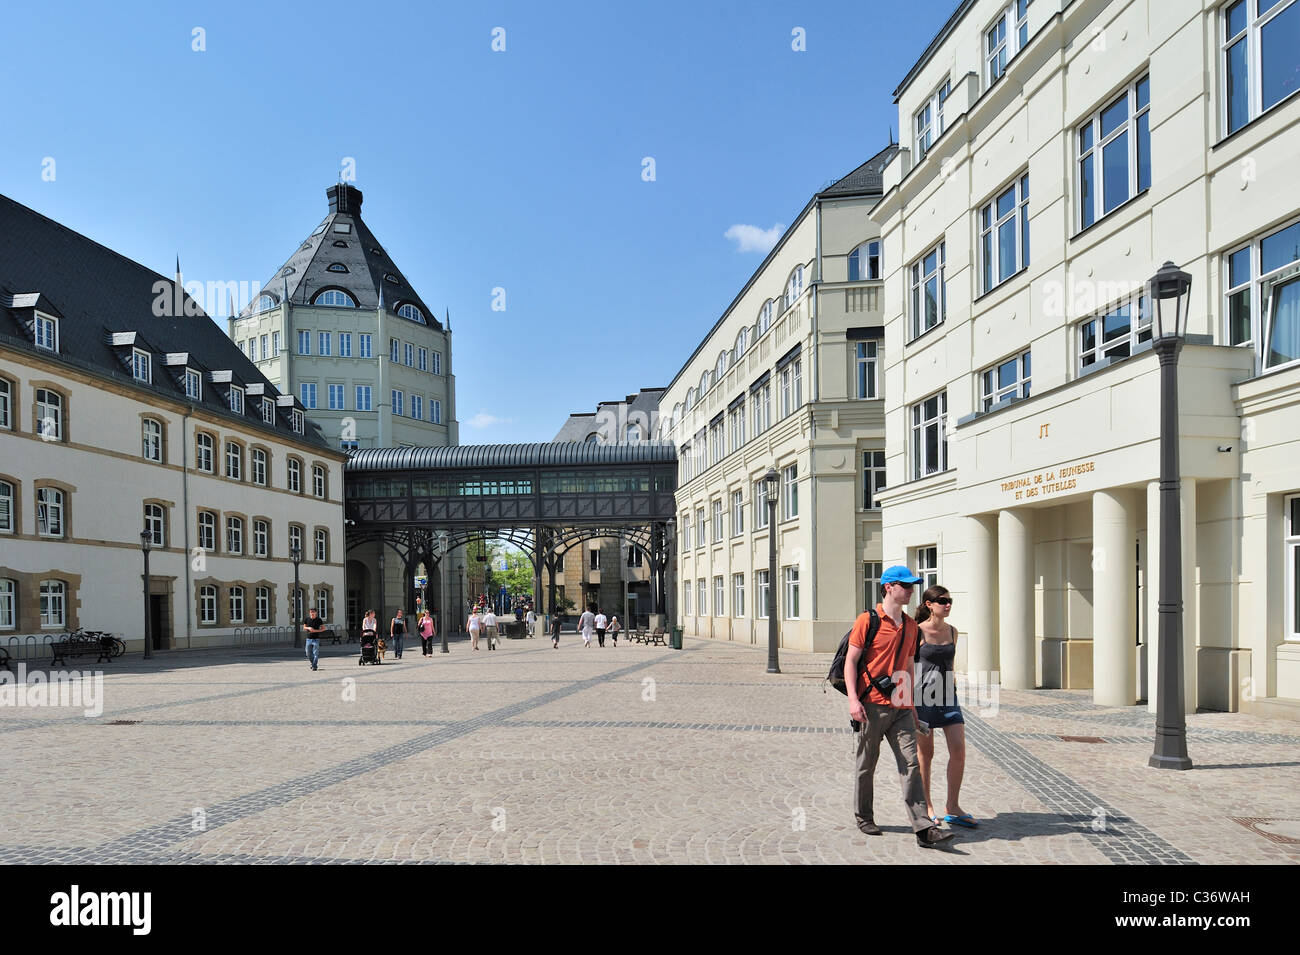 The cité judiciaire / Judiciary City on the Saint-Esprit plateau at Luxembourg, Grand Duchy of Luxembourg Stock Photo